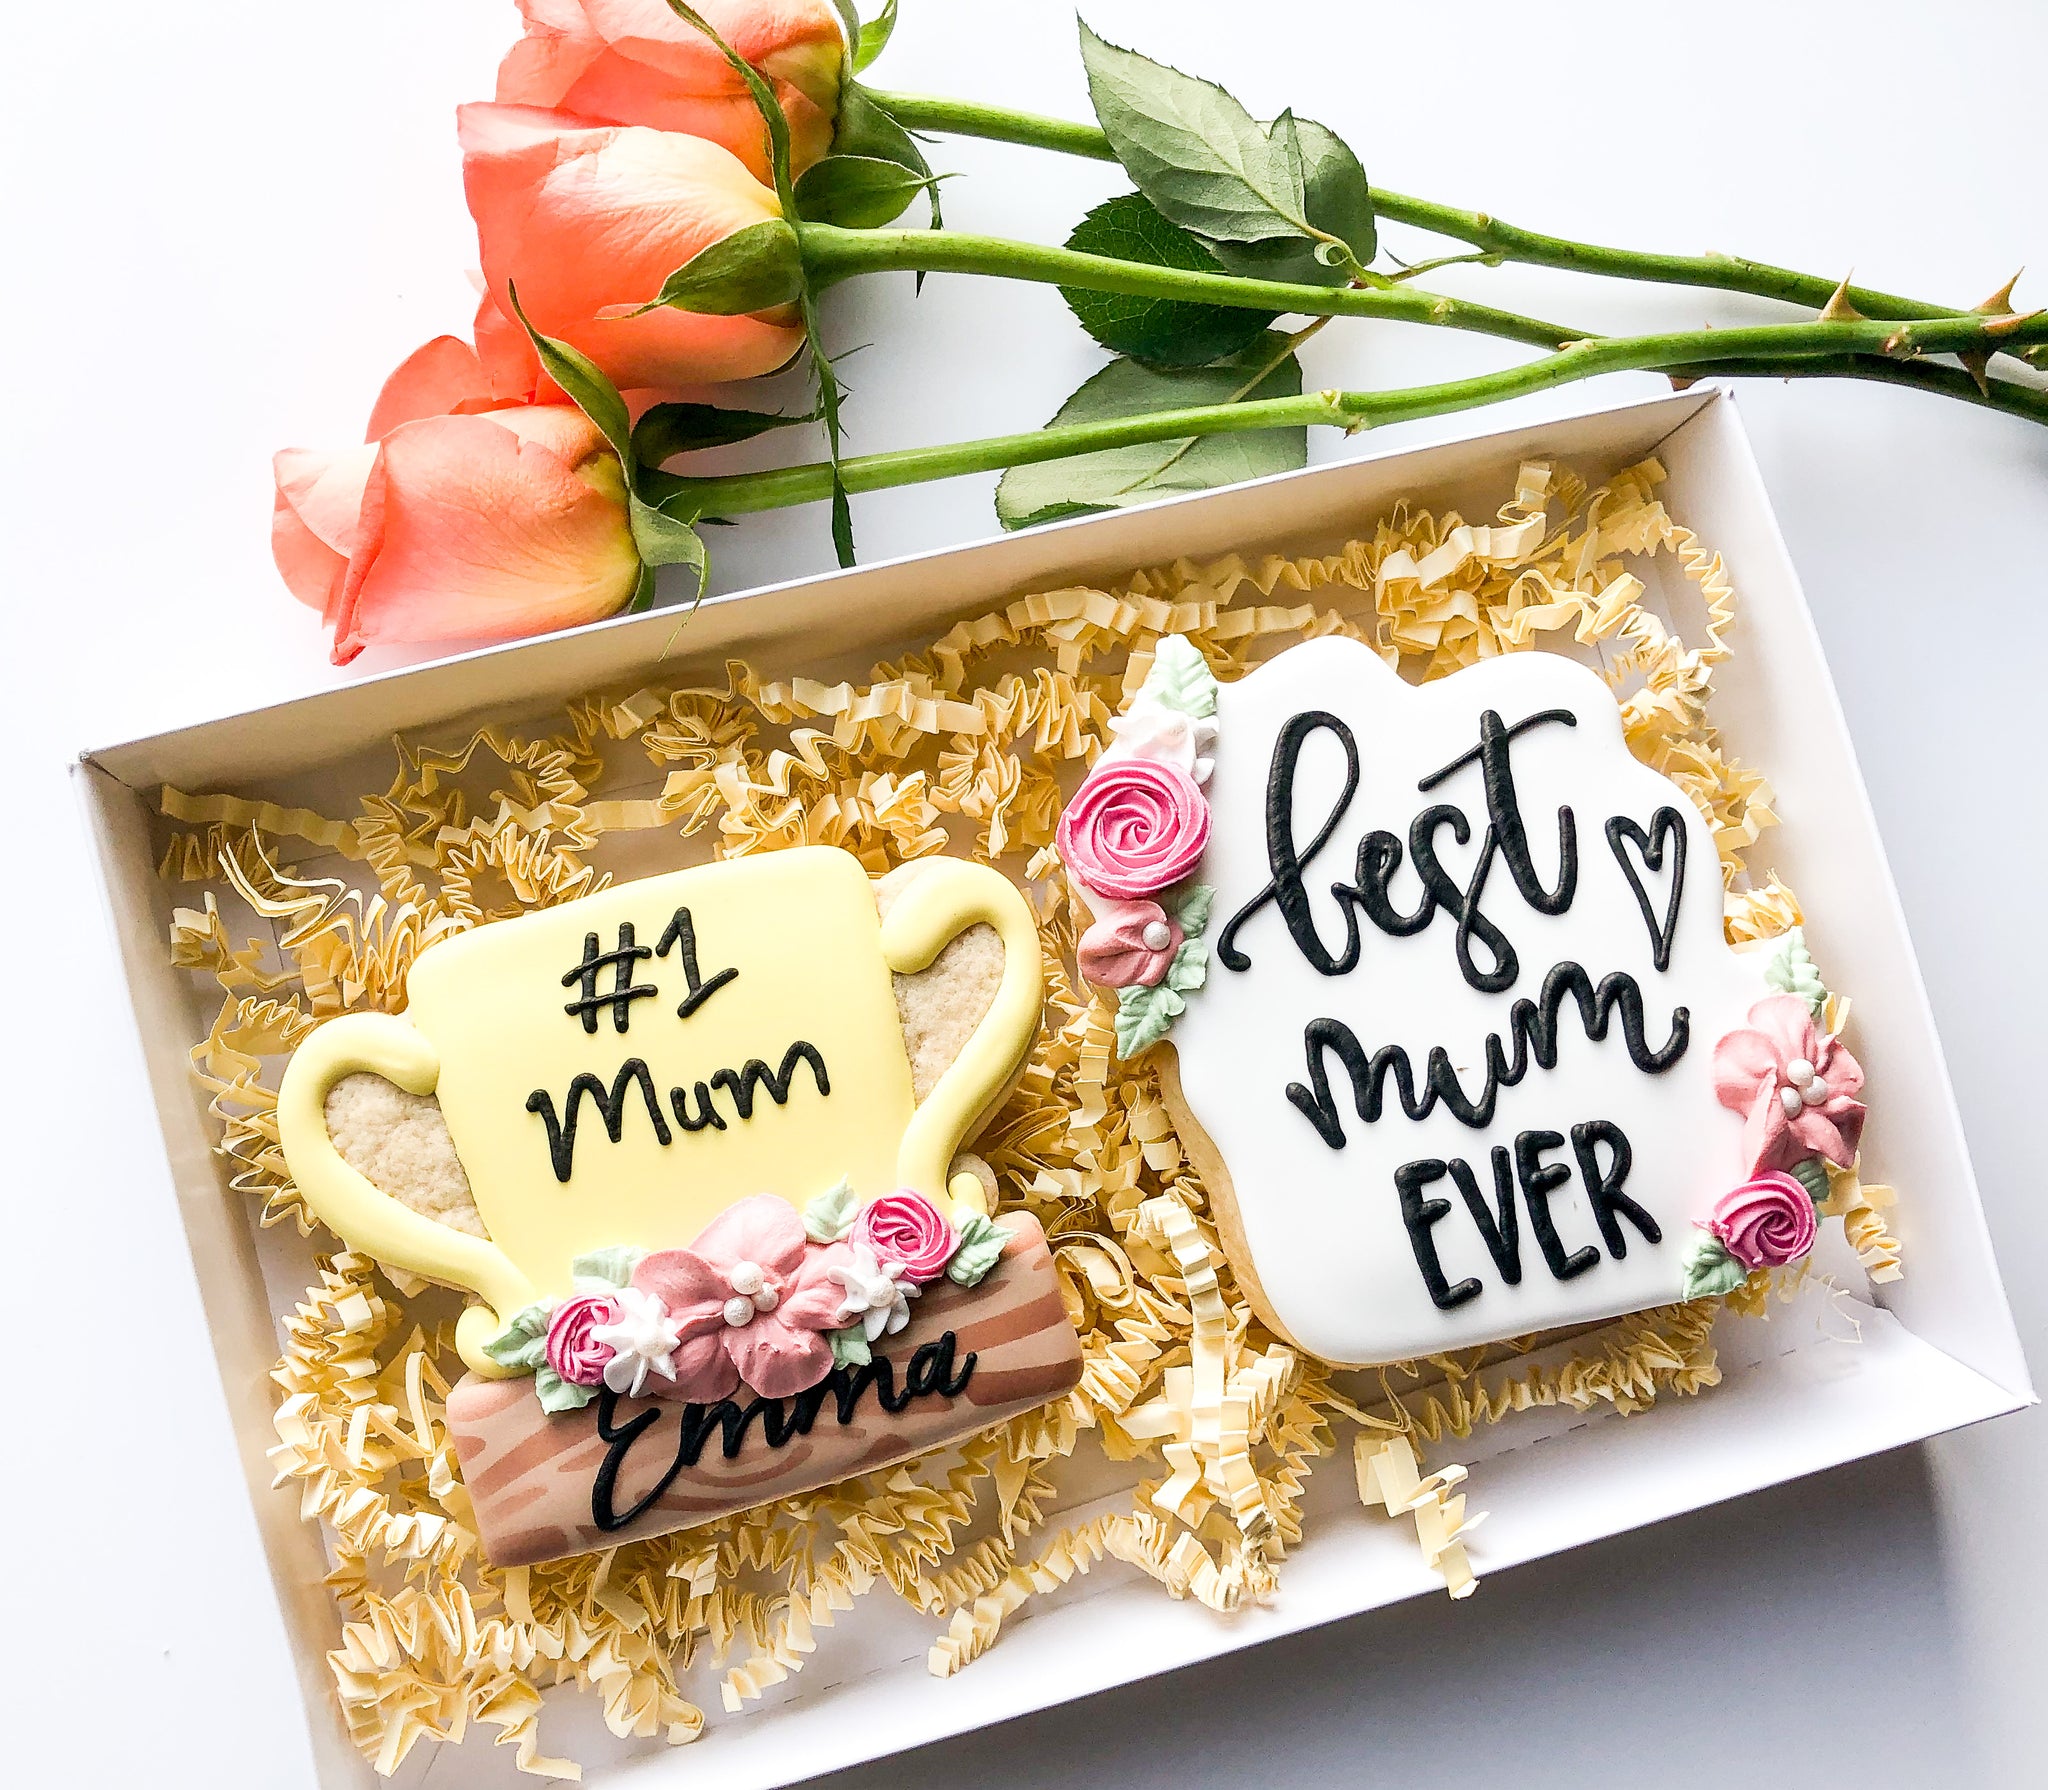 Mother’s Day Ideas